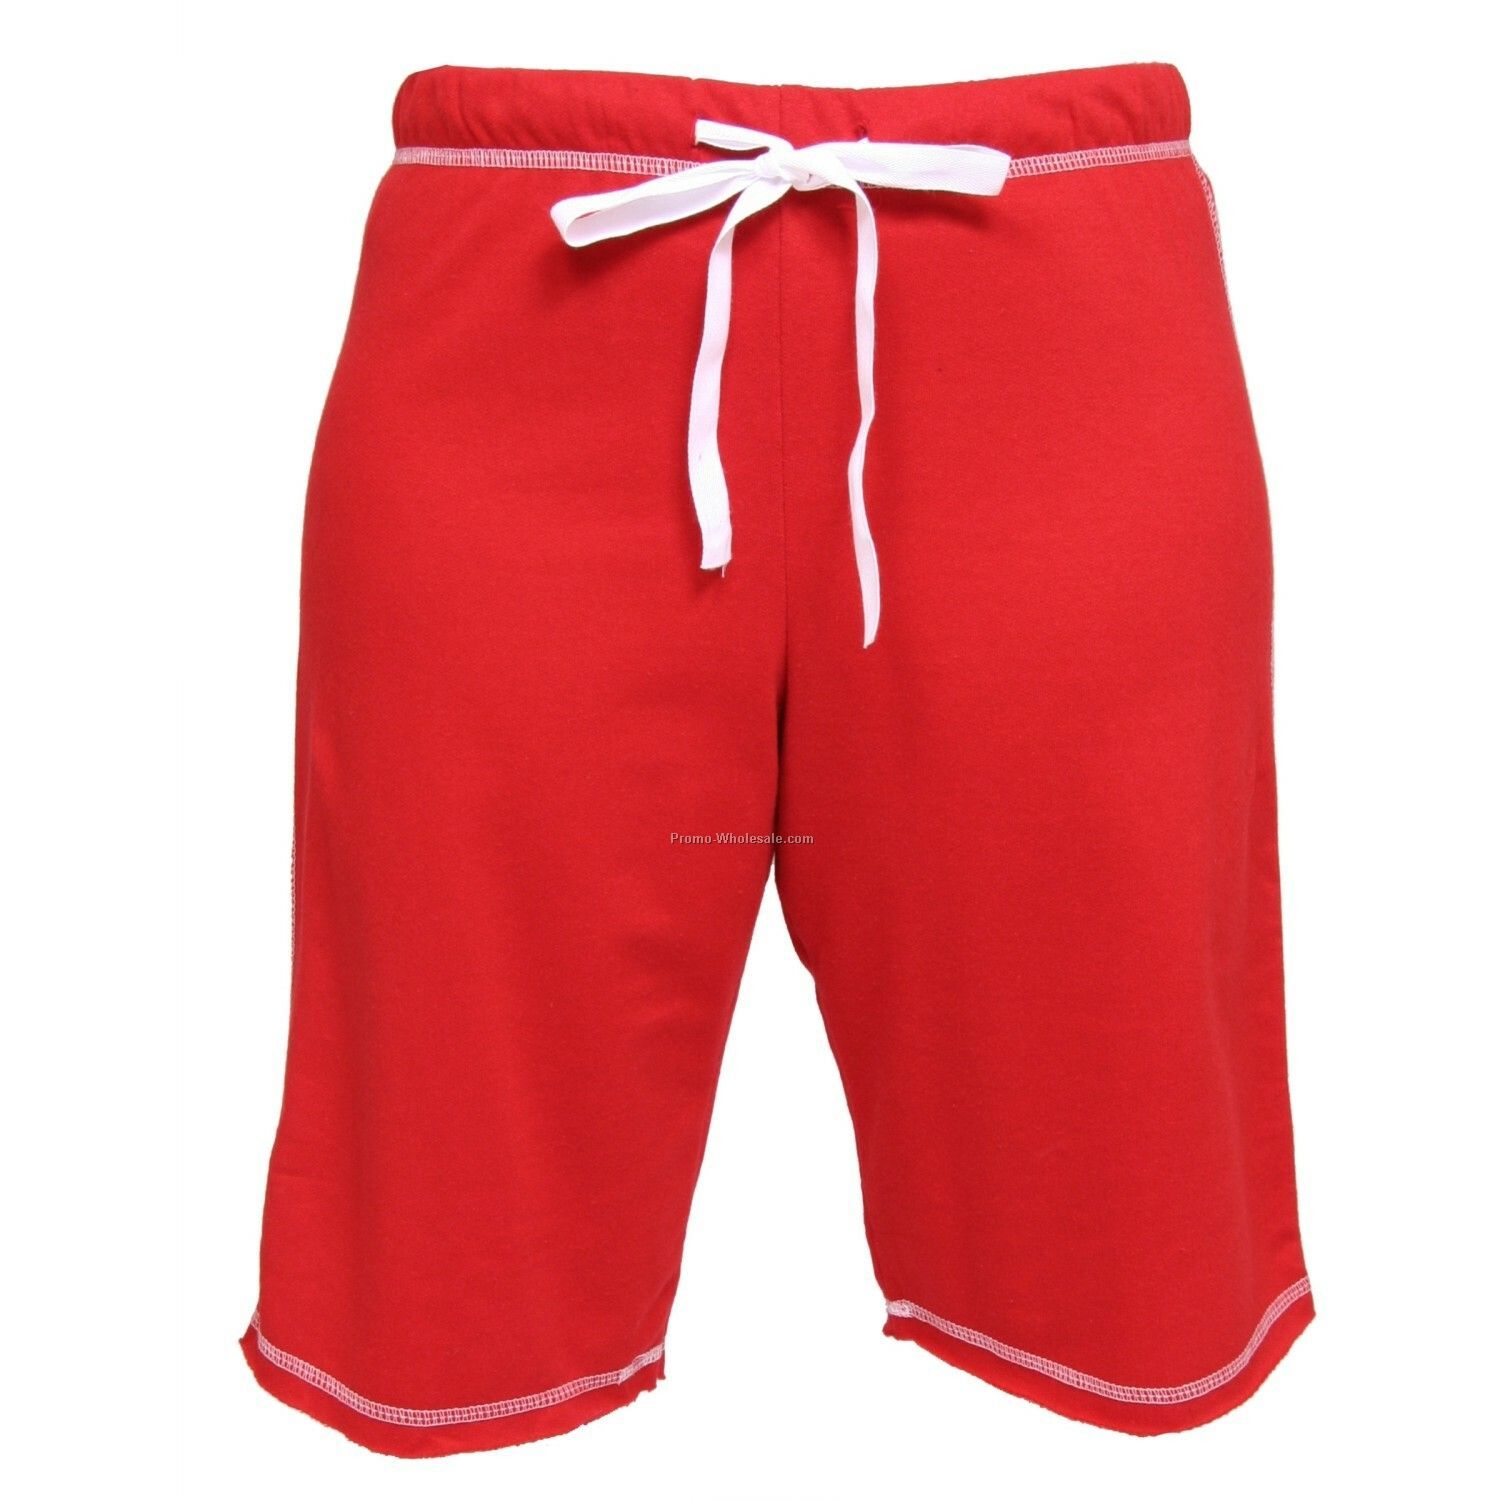 Youths' Red Board Shorts (Ys-yl)